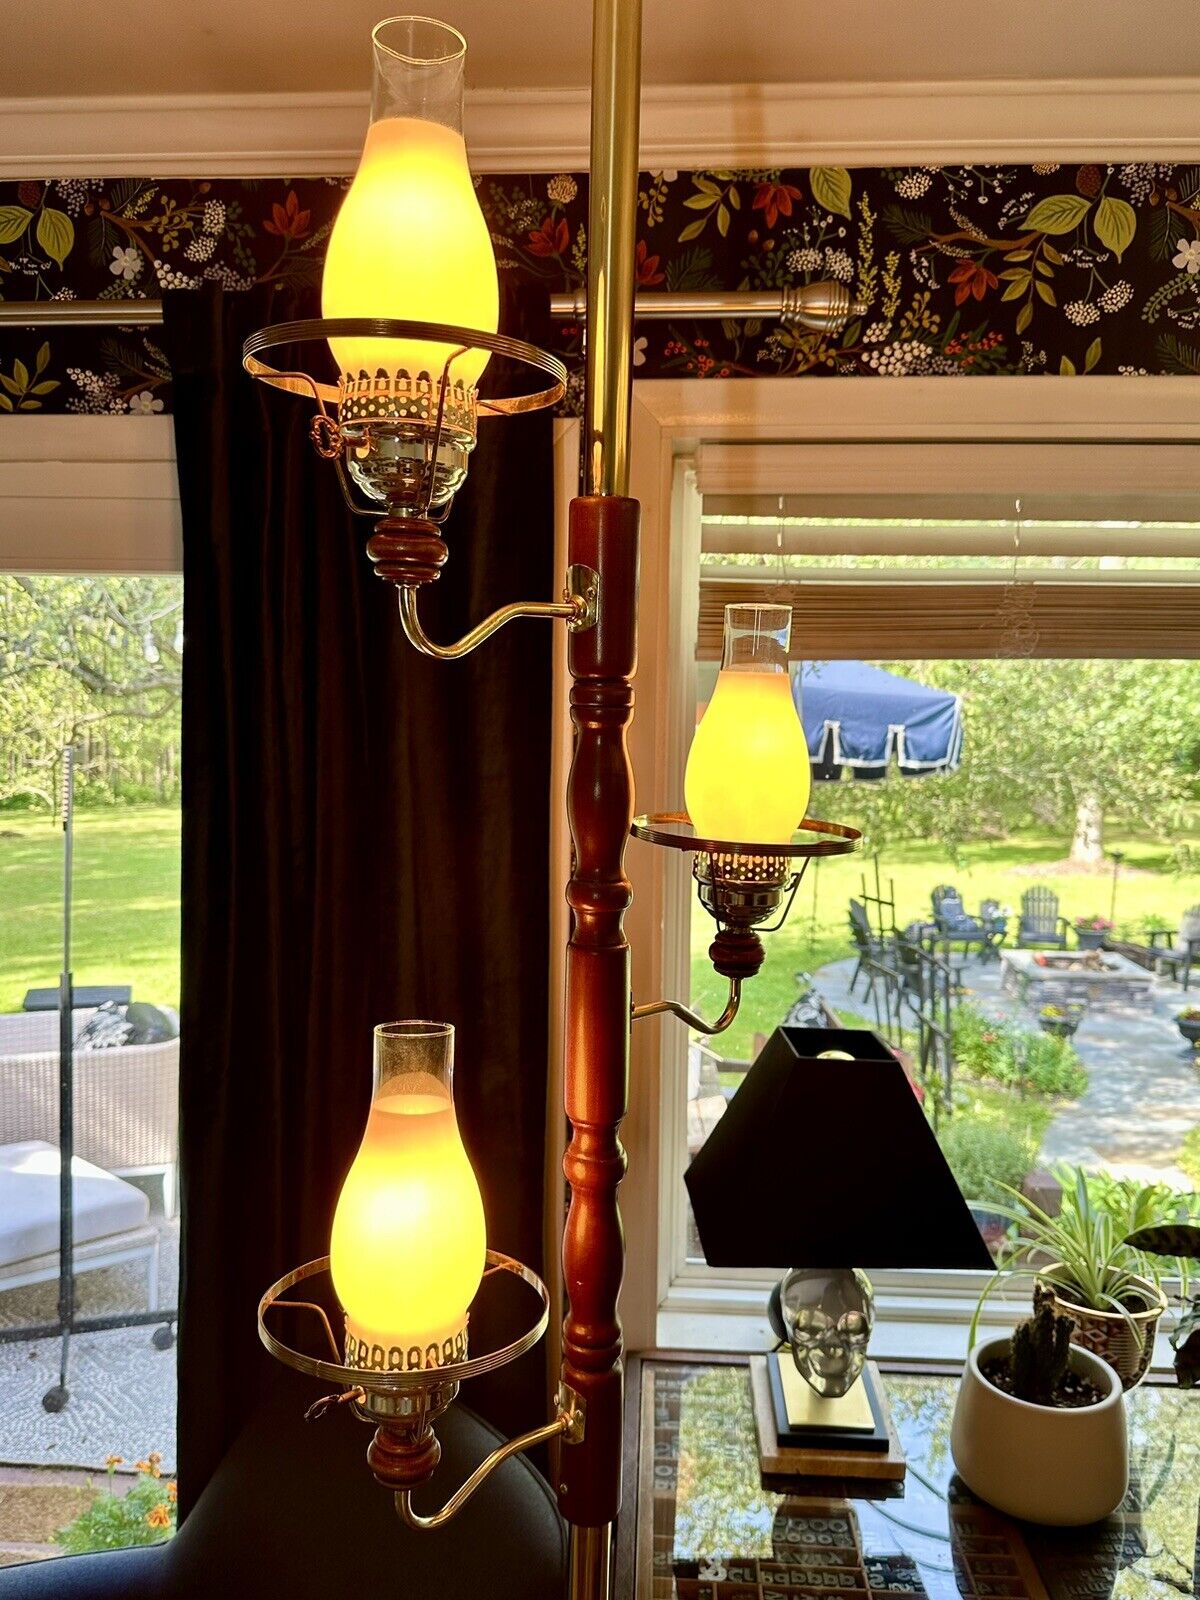 1960’s MCM Tension Pole Lamp, 3 Bulb W/2 Way Lighting Brown Wood W/Gold Accents